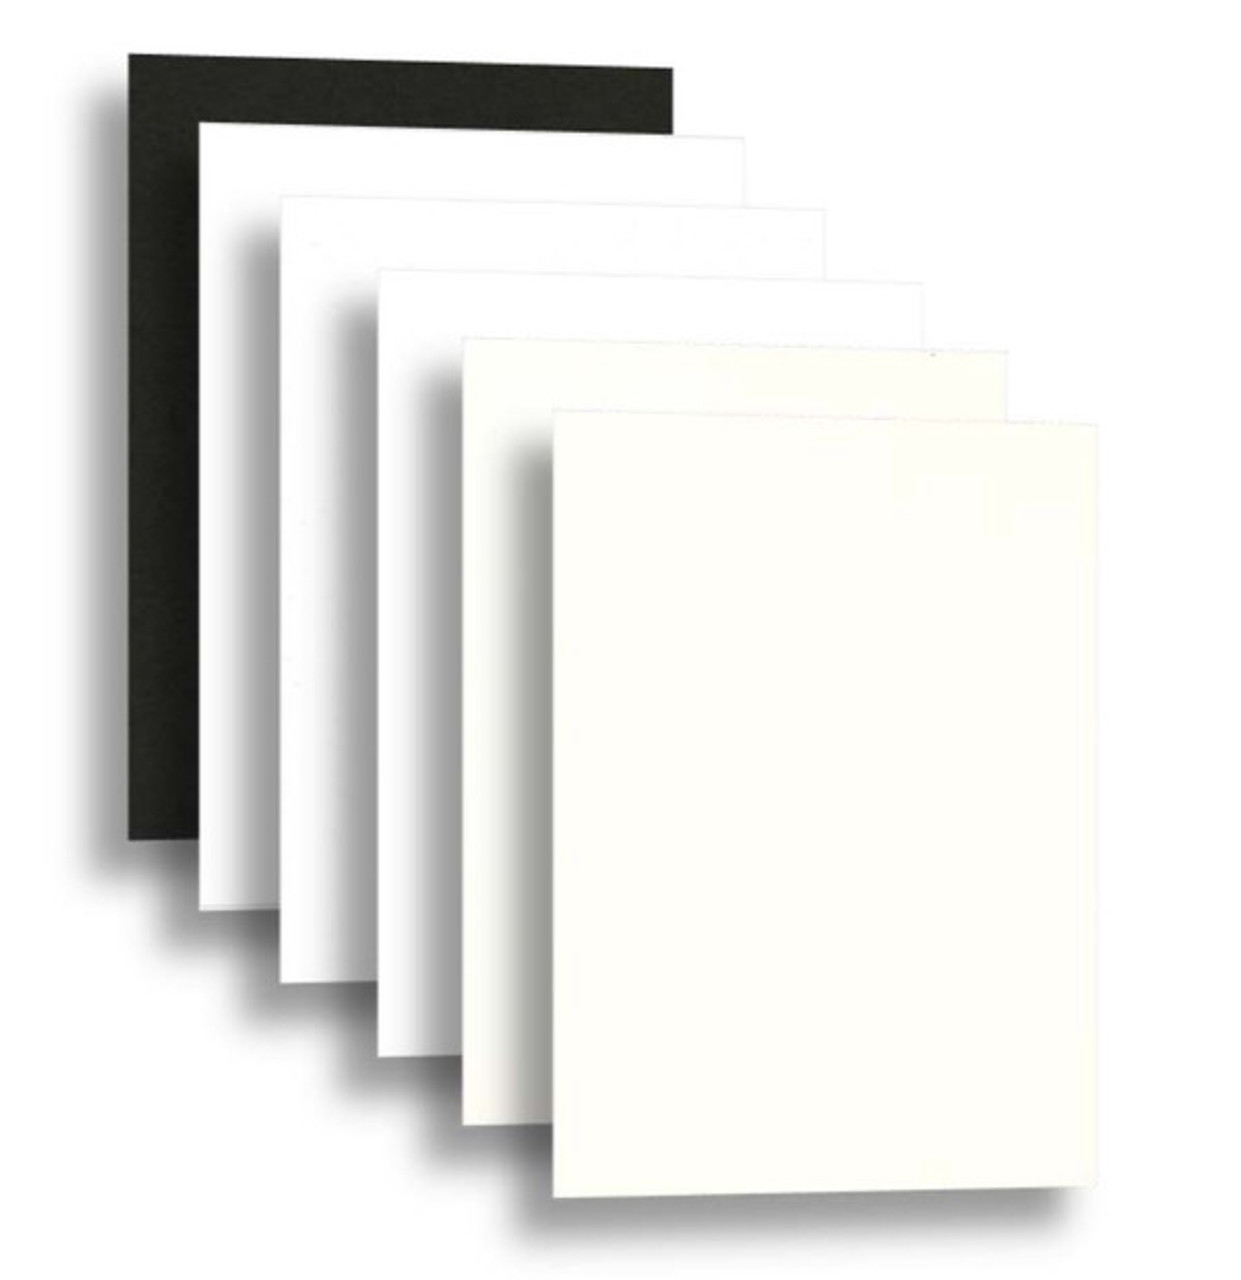 16x20 Conservation Mat Board Show Kit - 25 PACK - Shop Now